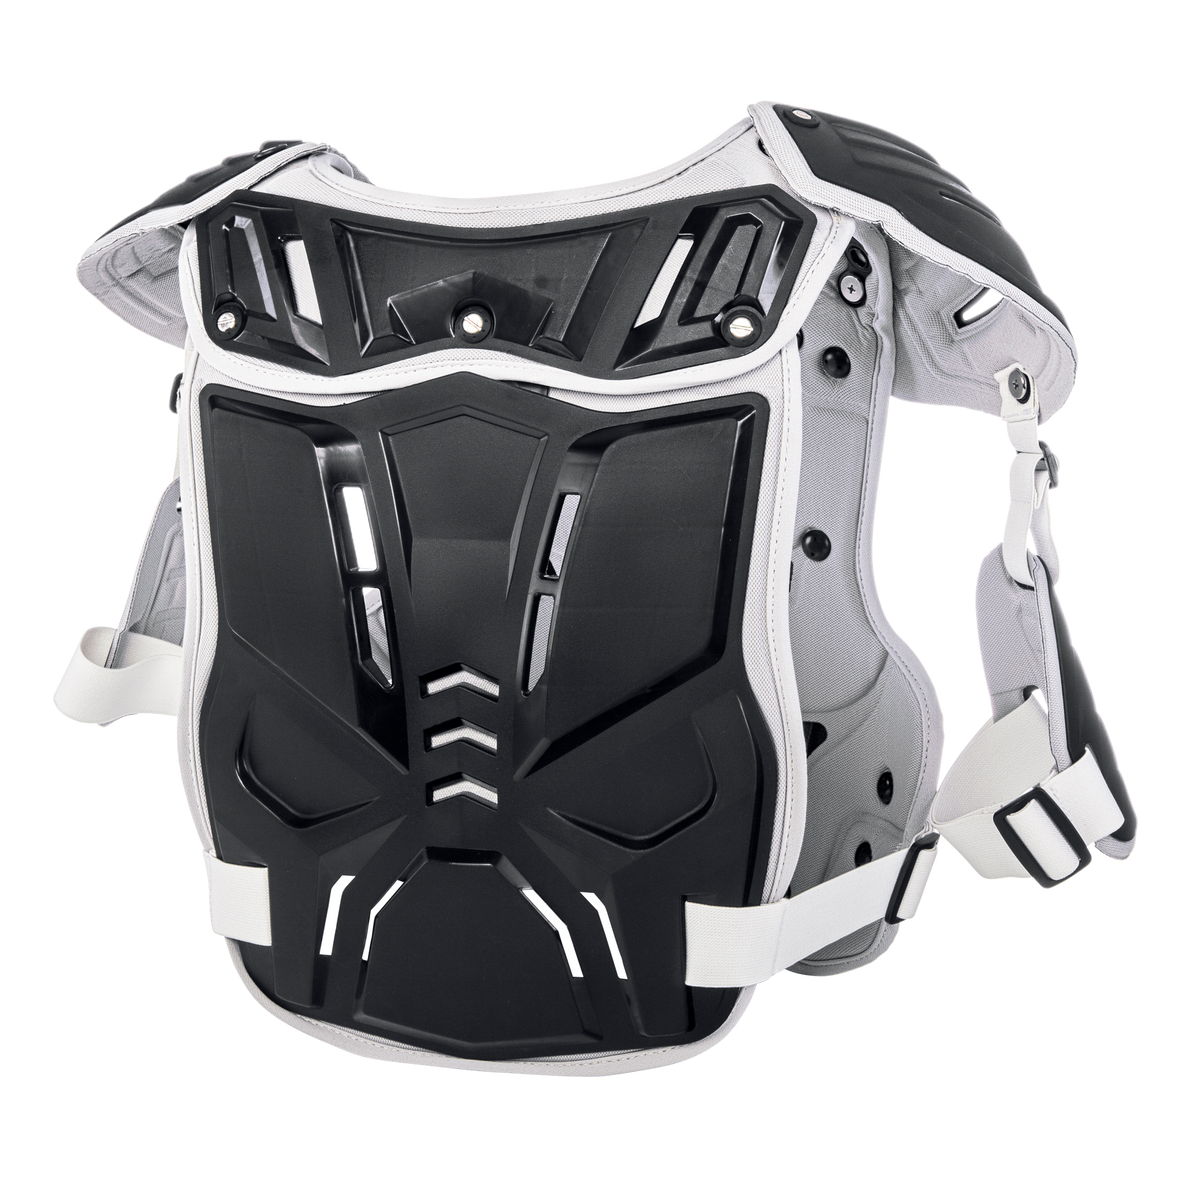 https://cdn.oneal.eu/assets/importedProductImages/PROTECTION/BODY%20ARMOUR/PXR%20STONE%20SHIELD/black_gray/2018_ONeal_PXR_StoneShield_black_gray_A2.png